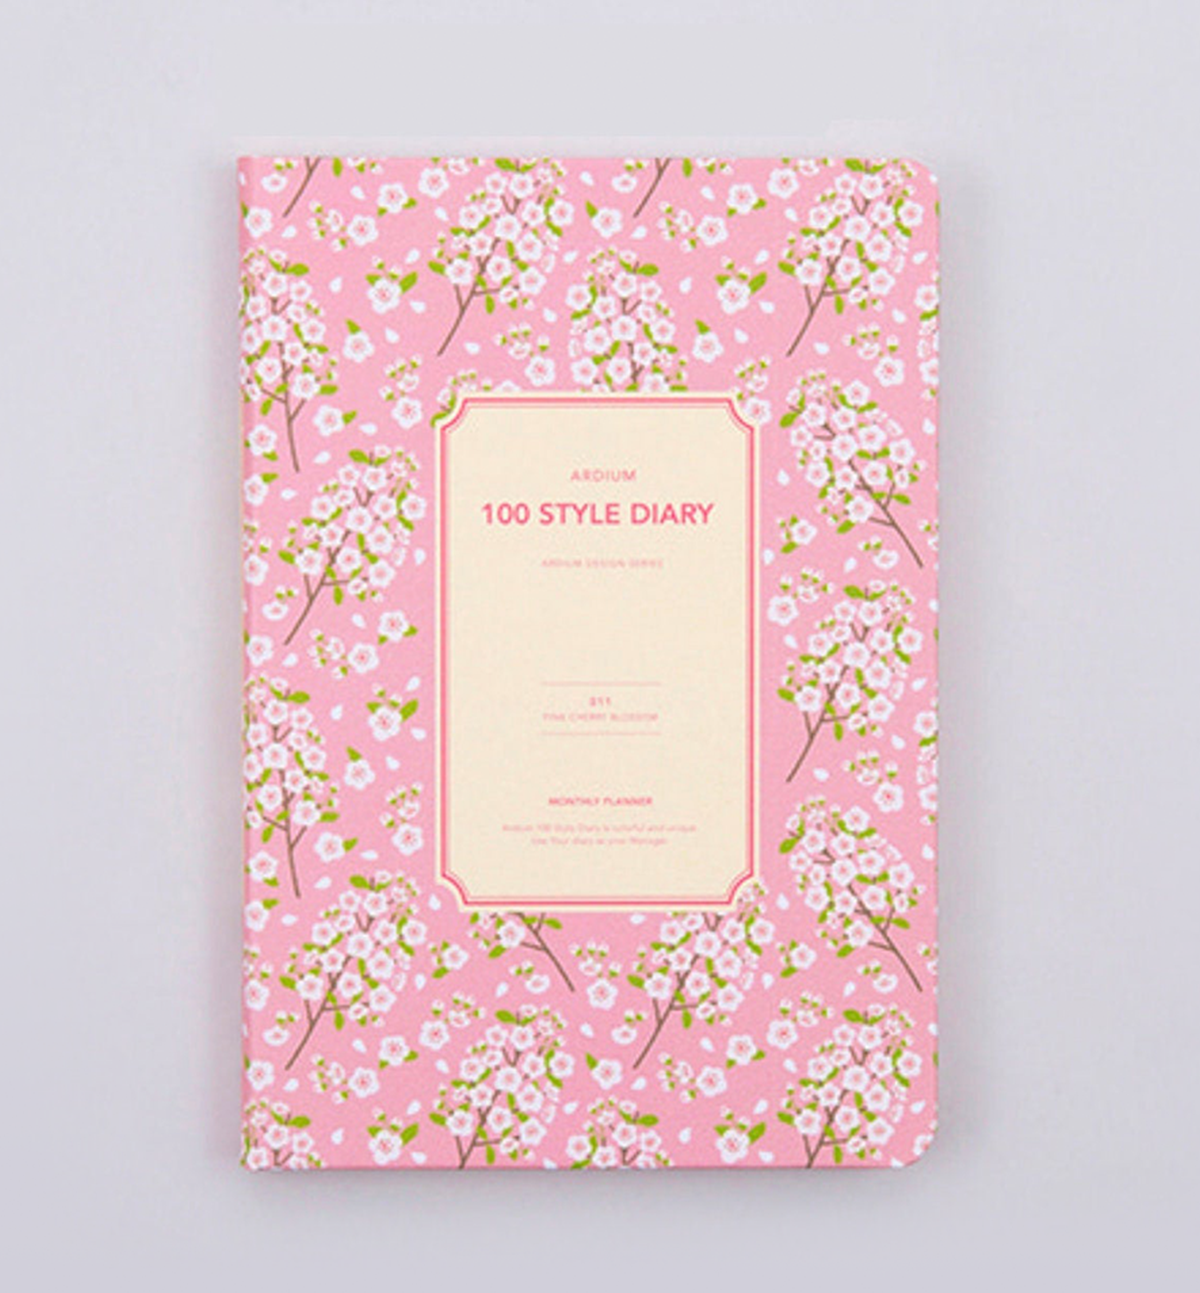 100 Style Diary [Pink Cherry Blossom]